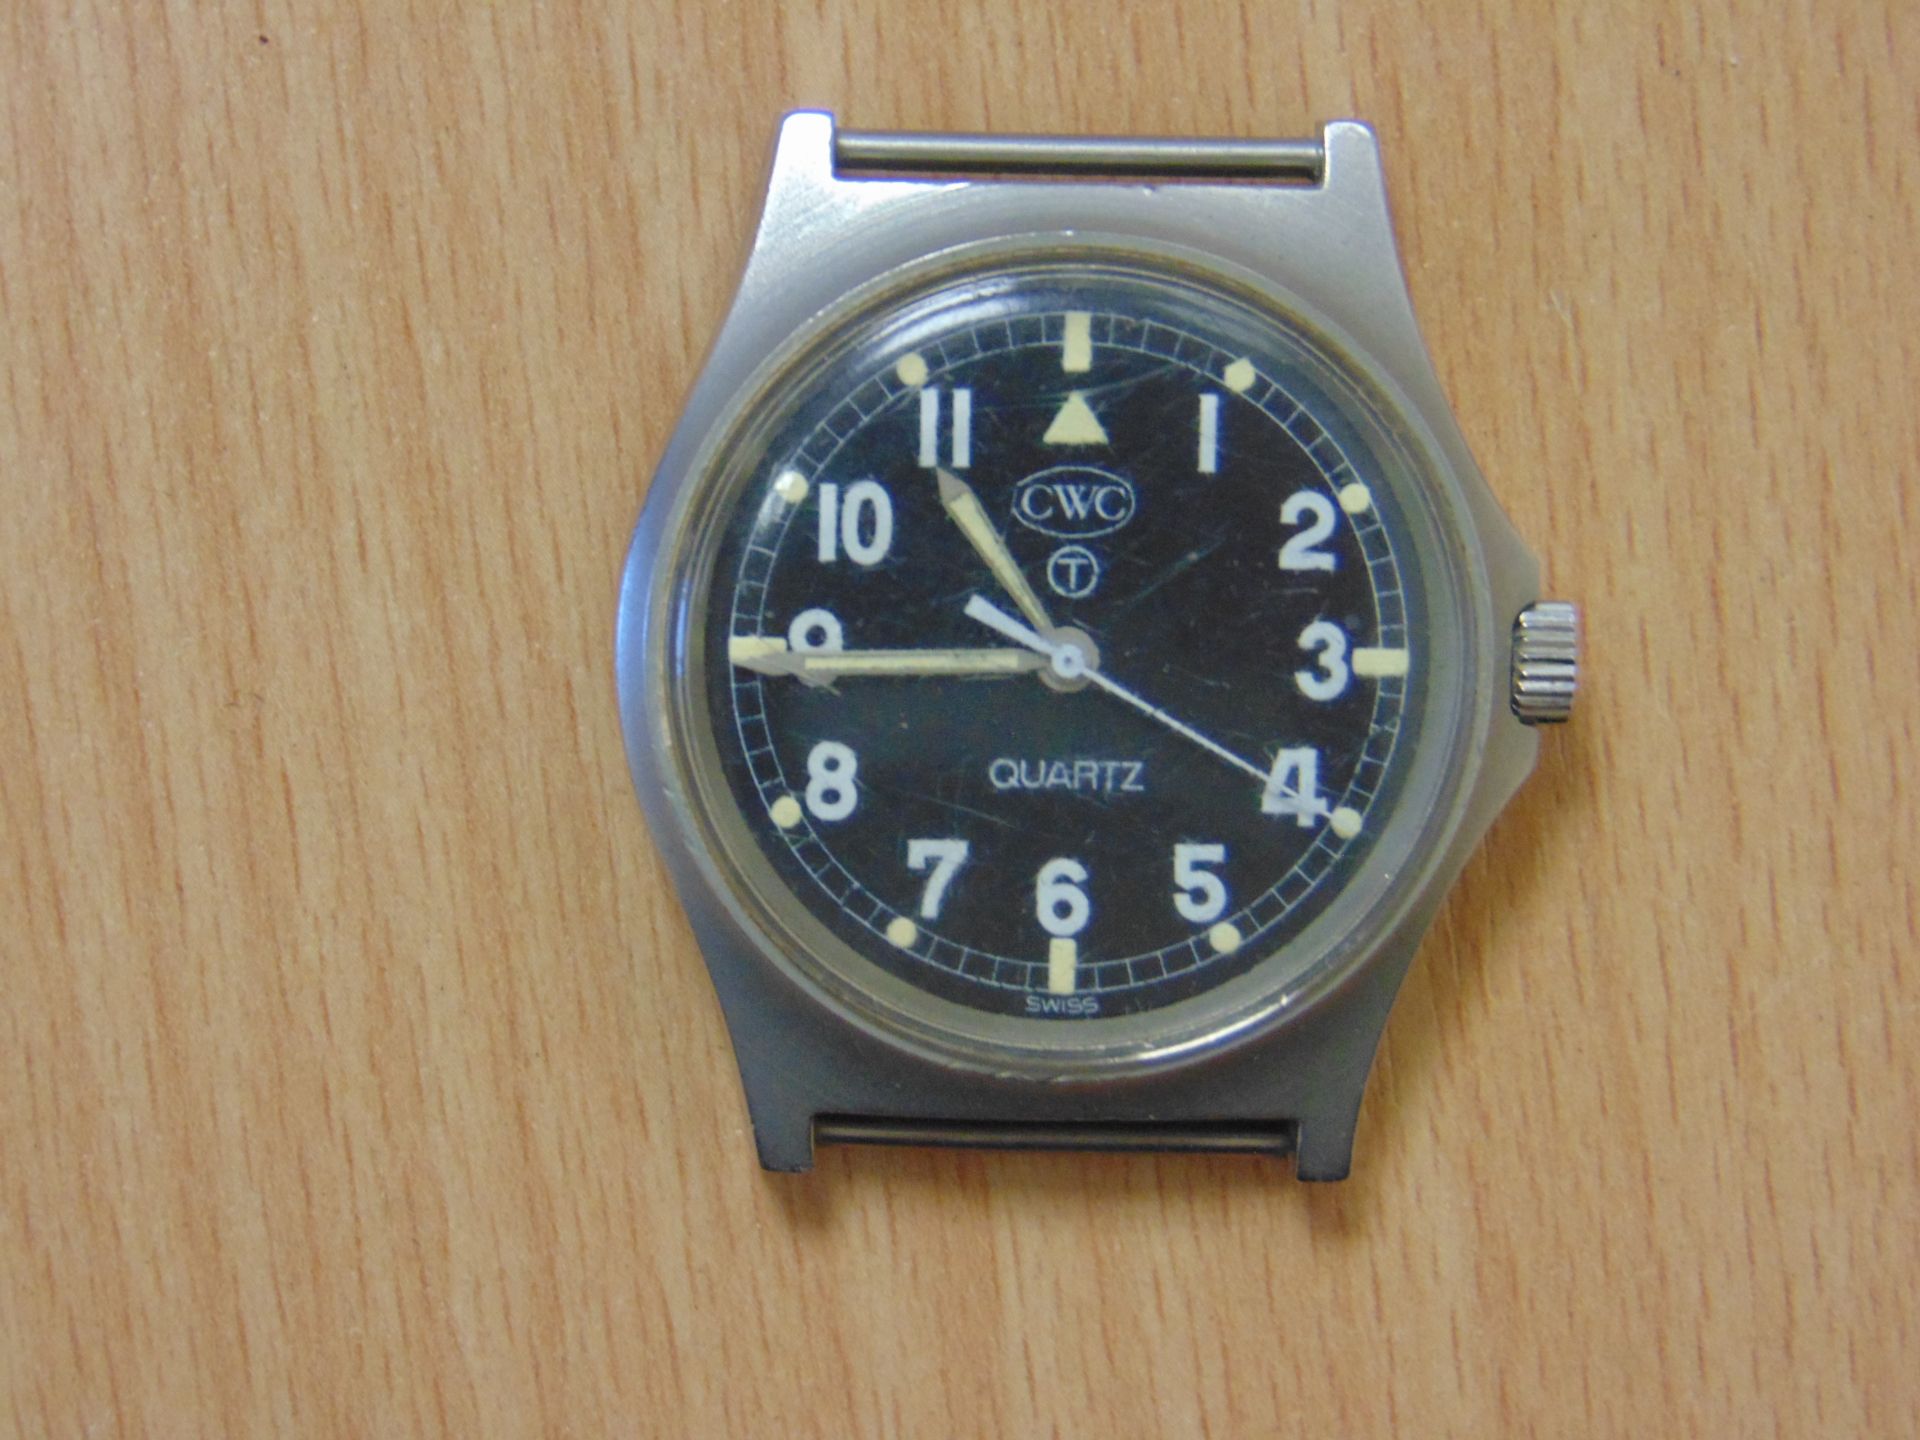 V. RARE FAT BOY CWC 0552 R. NAVY ISSUE SERVICE WATCH NATO MARKS DATED 1984 - Image 4 of 7